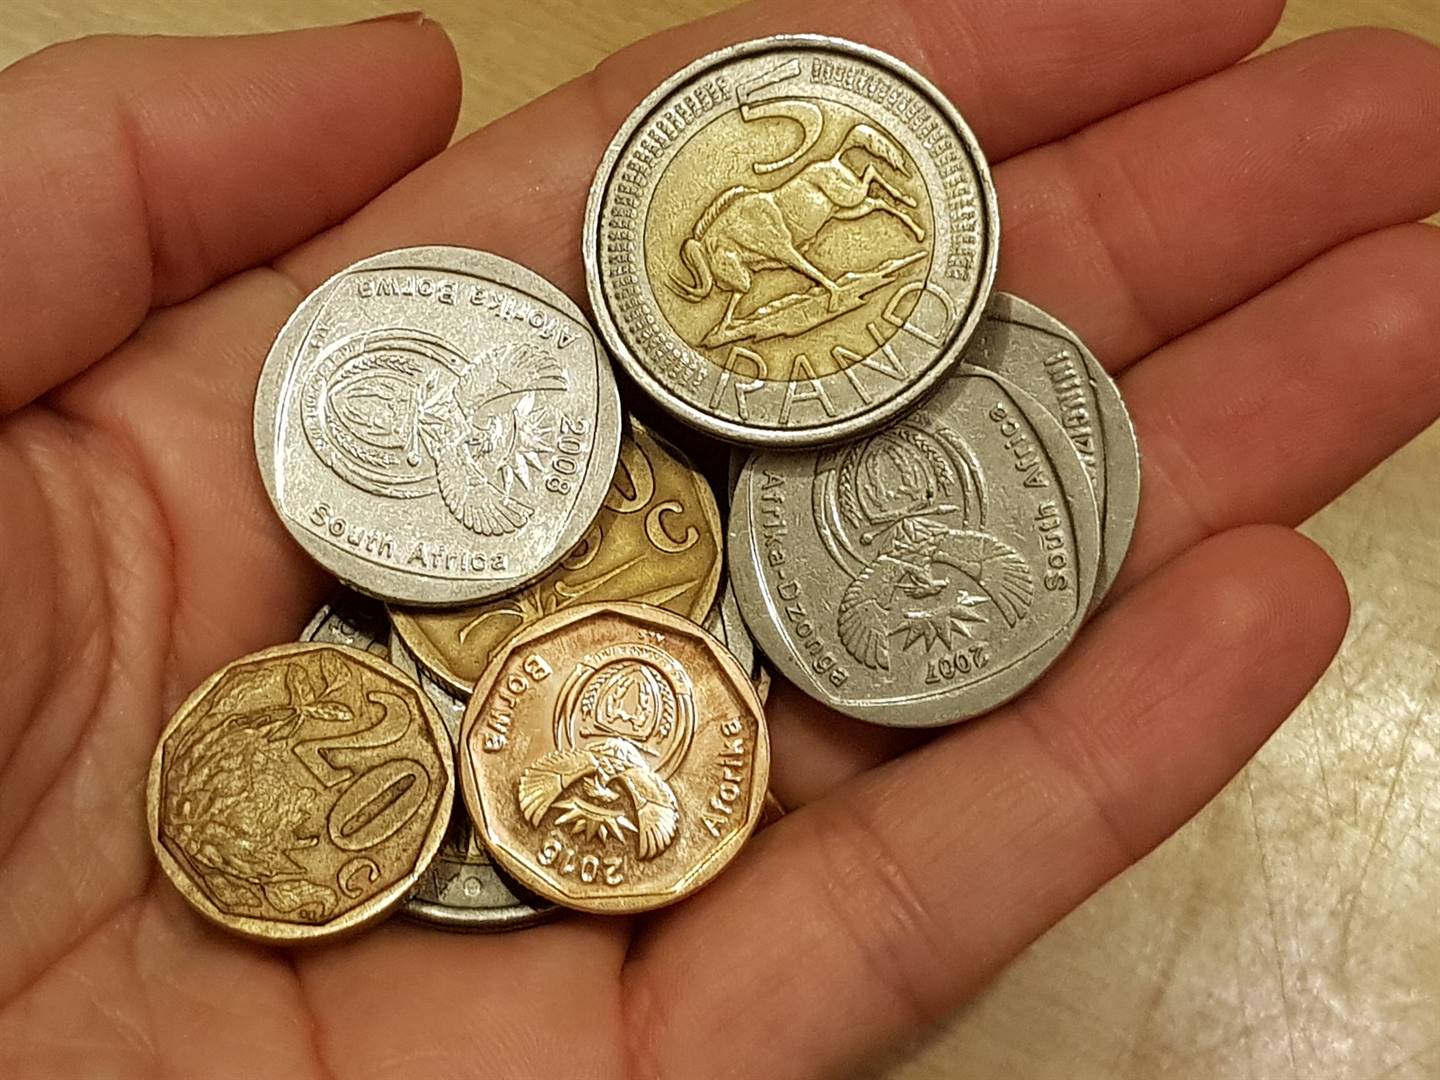 How To Make Money Selling Old South African Coins The Best Ict Consultants In Kenya